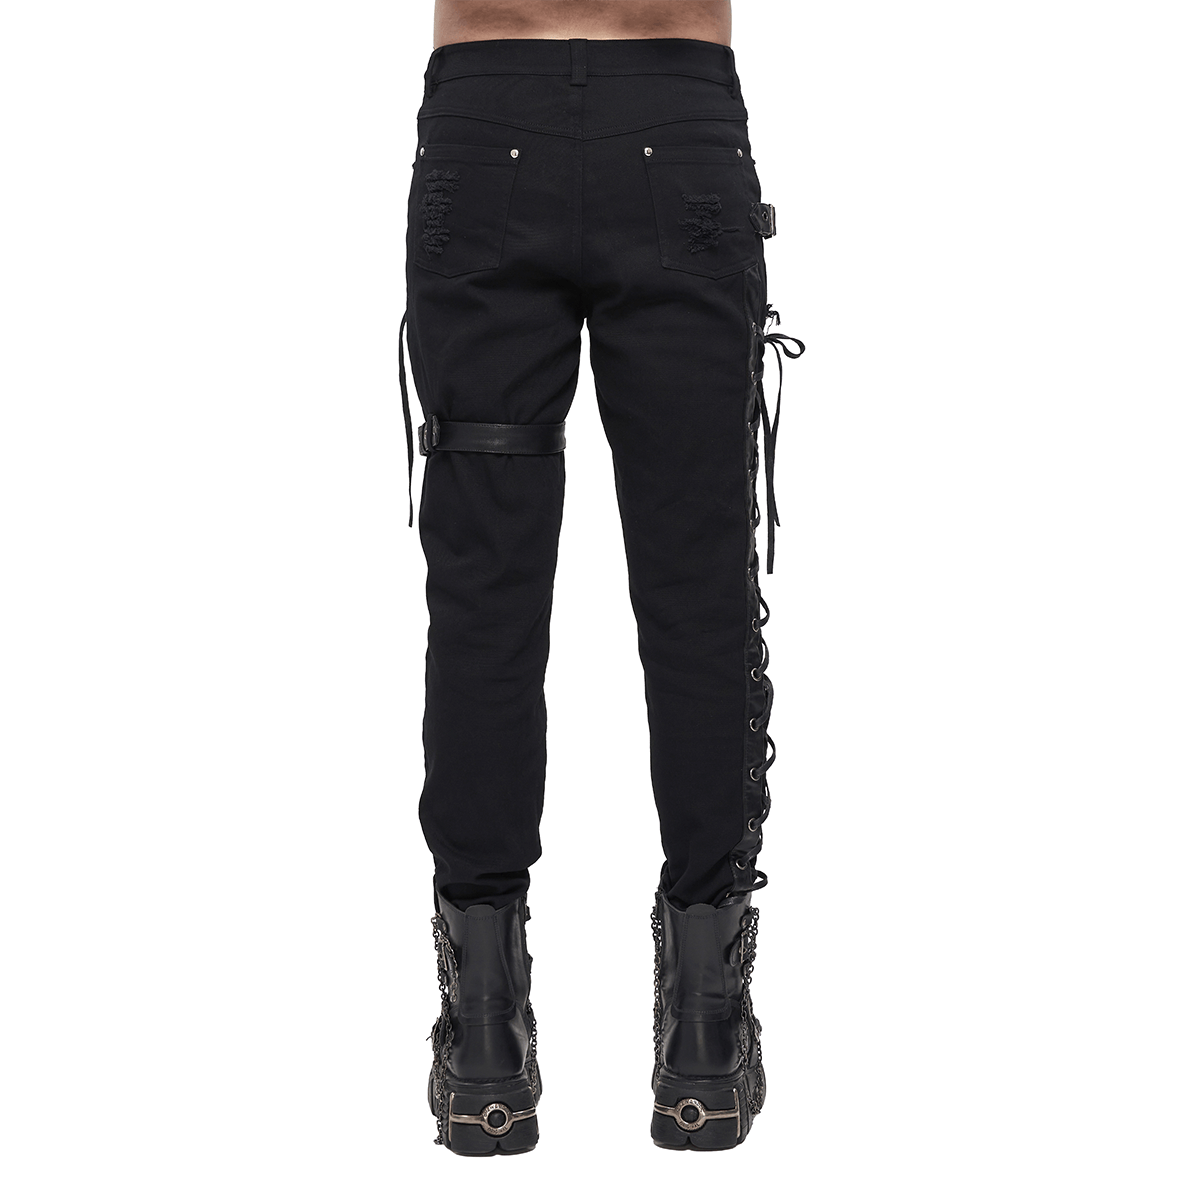 Buy TOPPROSPER Pants Chain Jean Wallet Chain Fashion Hip Hop Punk Trousers  Chain for Women and men (Silver 2) at Amazon.in